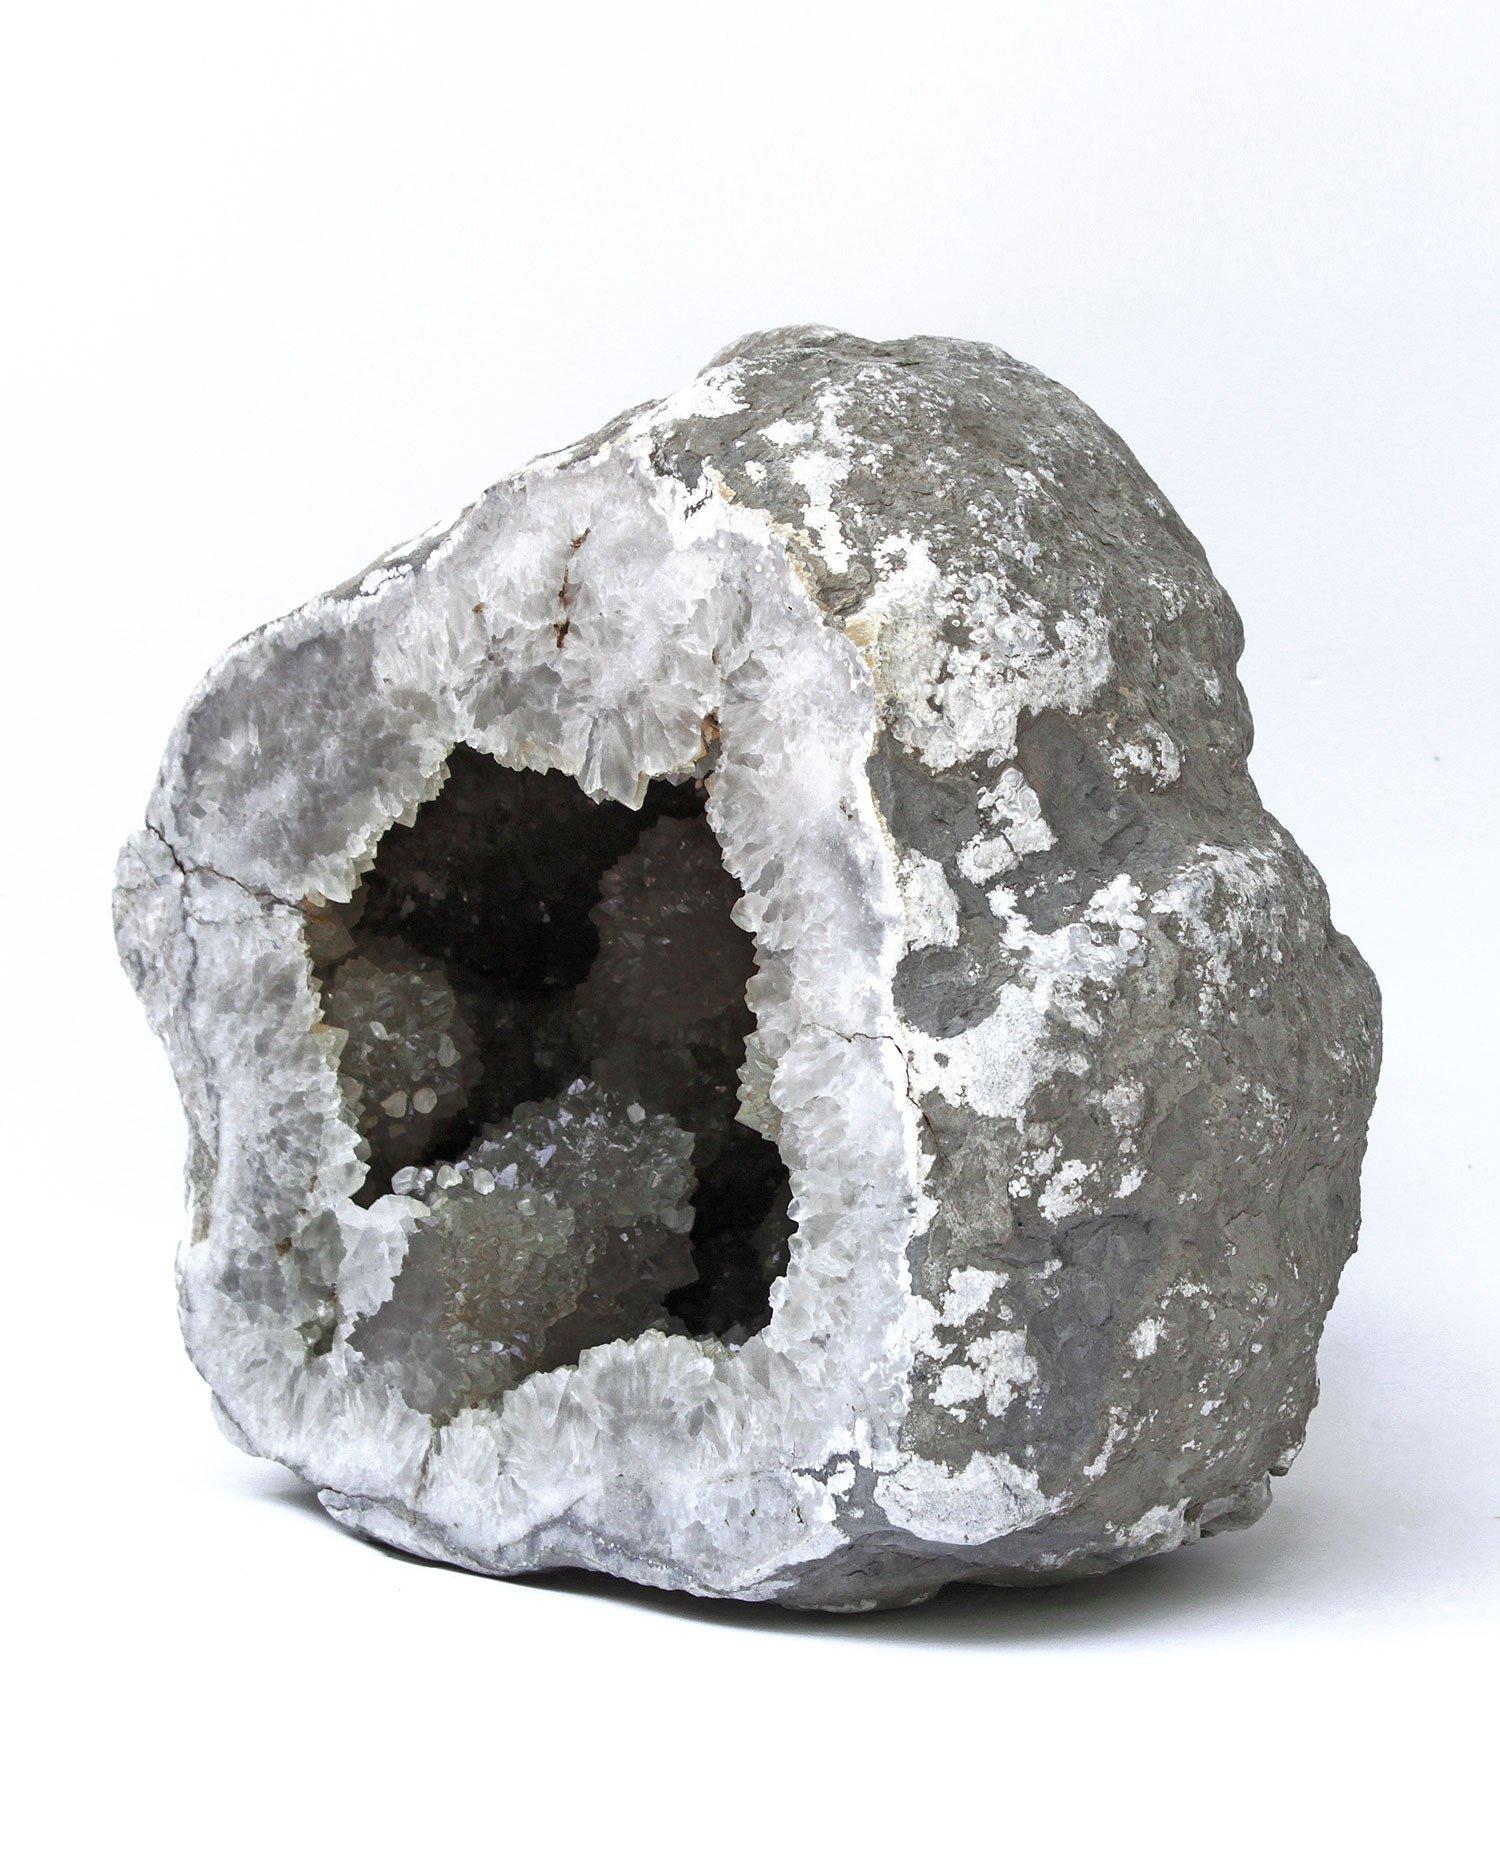 Geode from the Keokuk, Iowa area containing a variety of minerals with a quartz druzy interior. It took around 240 million years to create the beautiful quartz crystals covering the interior walls of the Keokuk geode. The large number of mineral